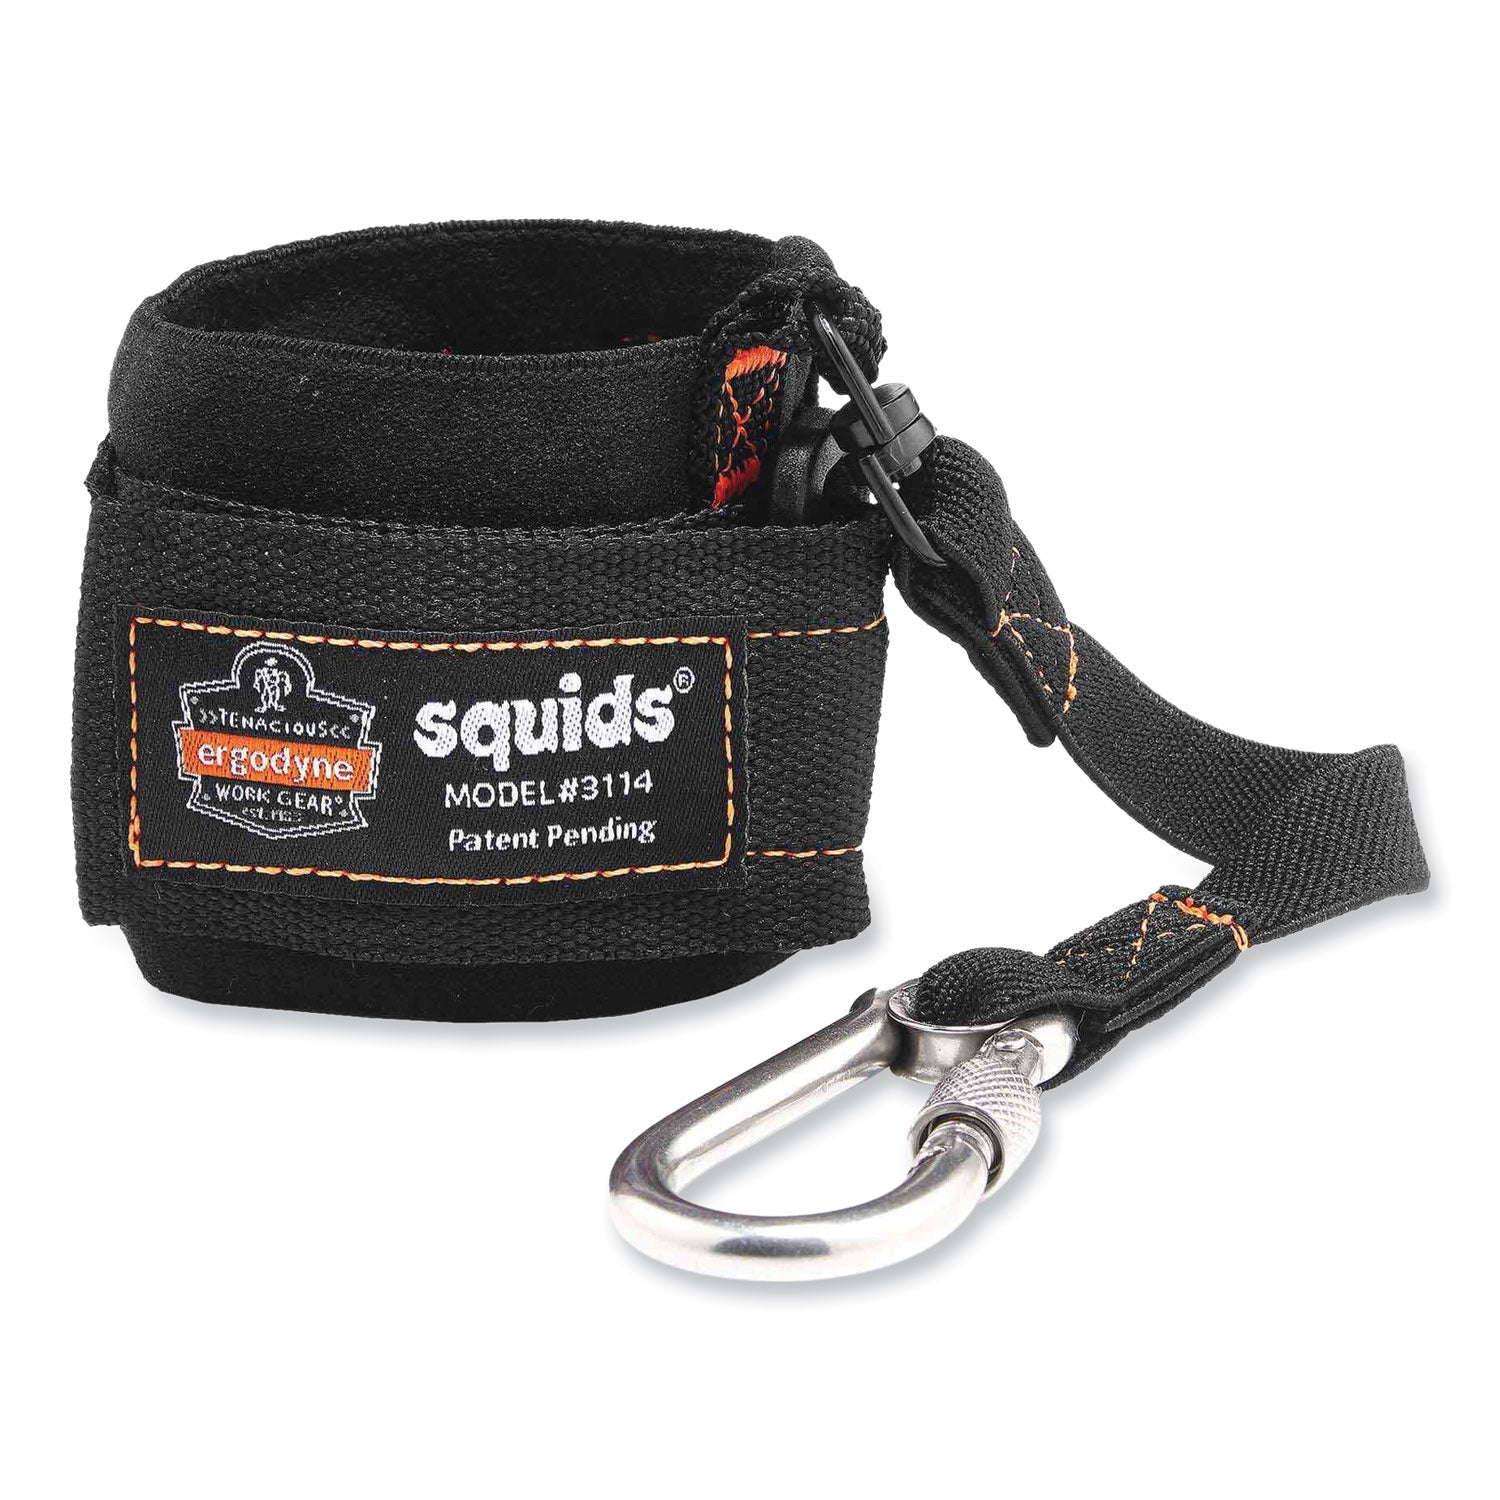 squids-3114-pull-on-wrist-lanyard-w-stainless-steel-carabiner-3lb-max-work-capacity-75-black-ships-in-1-3-business-days_ego19056 - 2